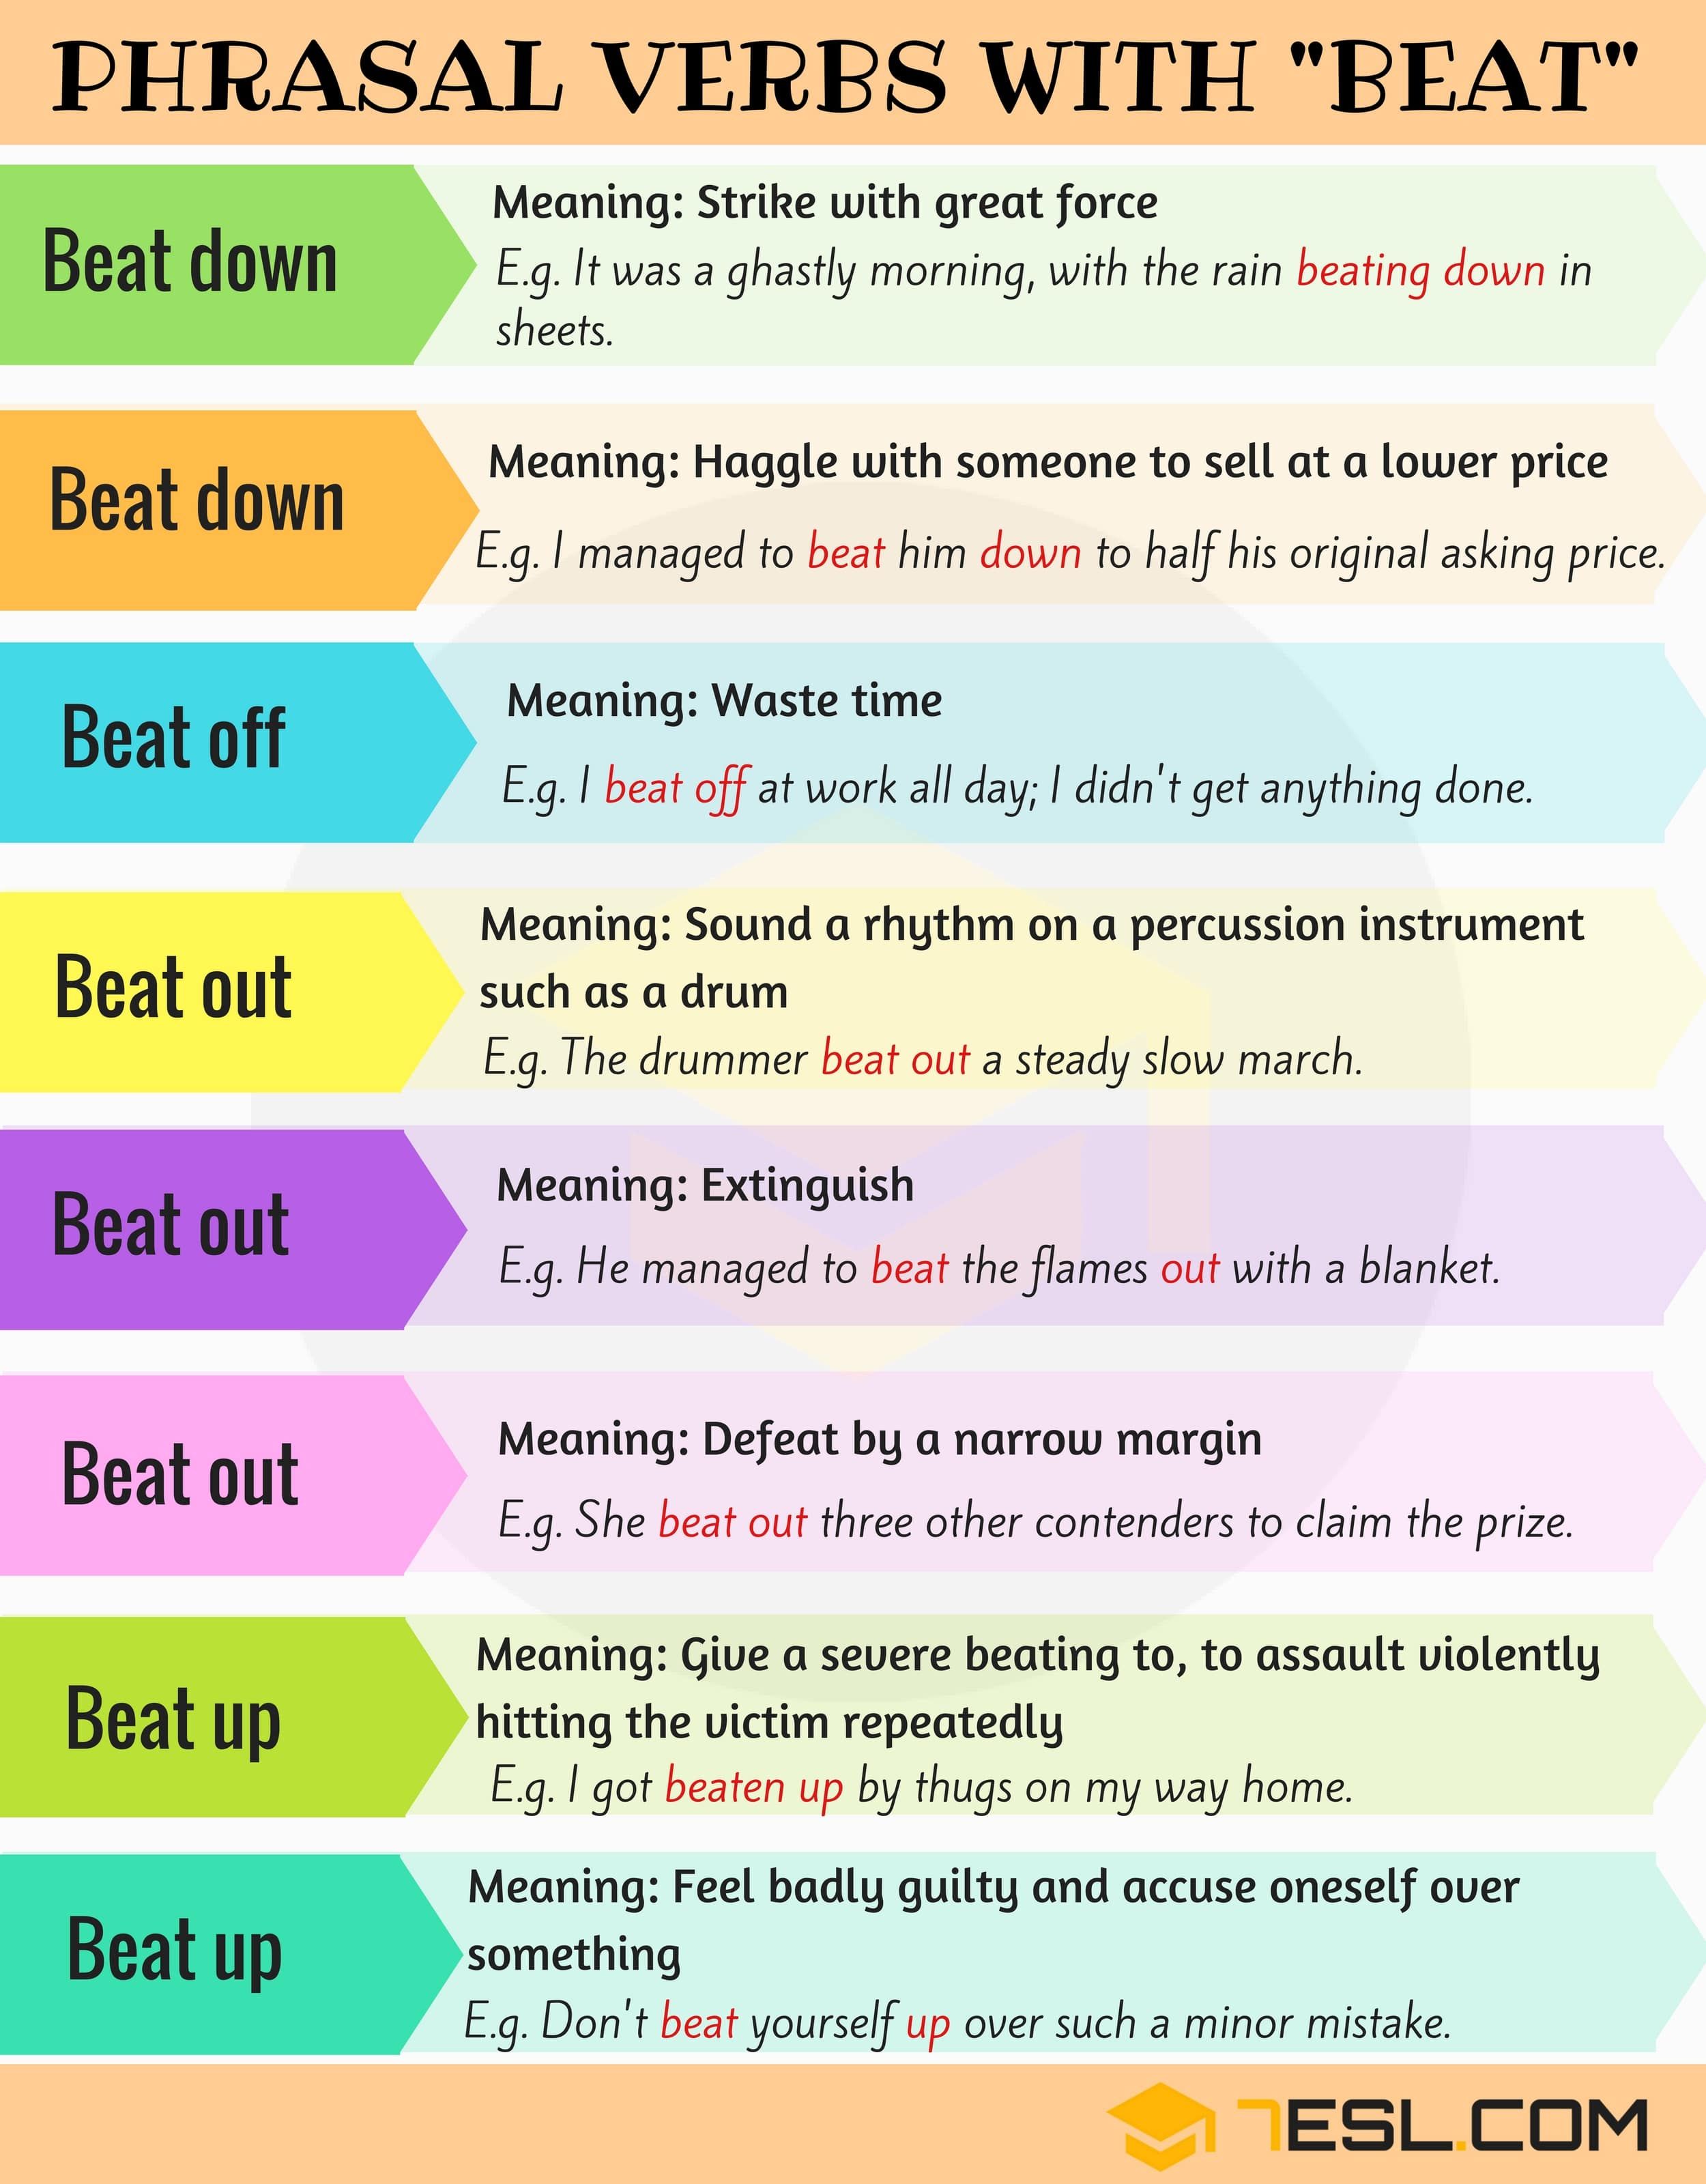 86-useful-phrasal-verbs-with-go-with-meaning-and-examples-7-e-s-l